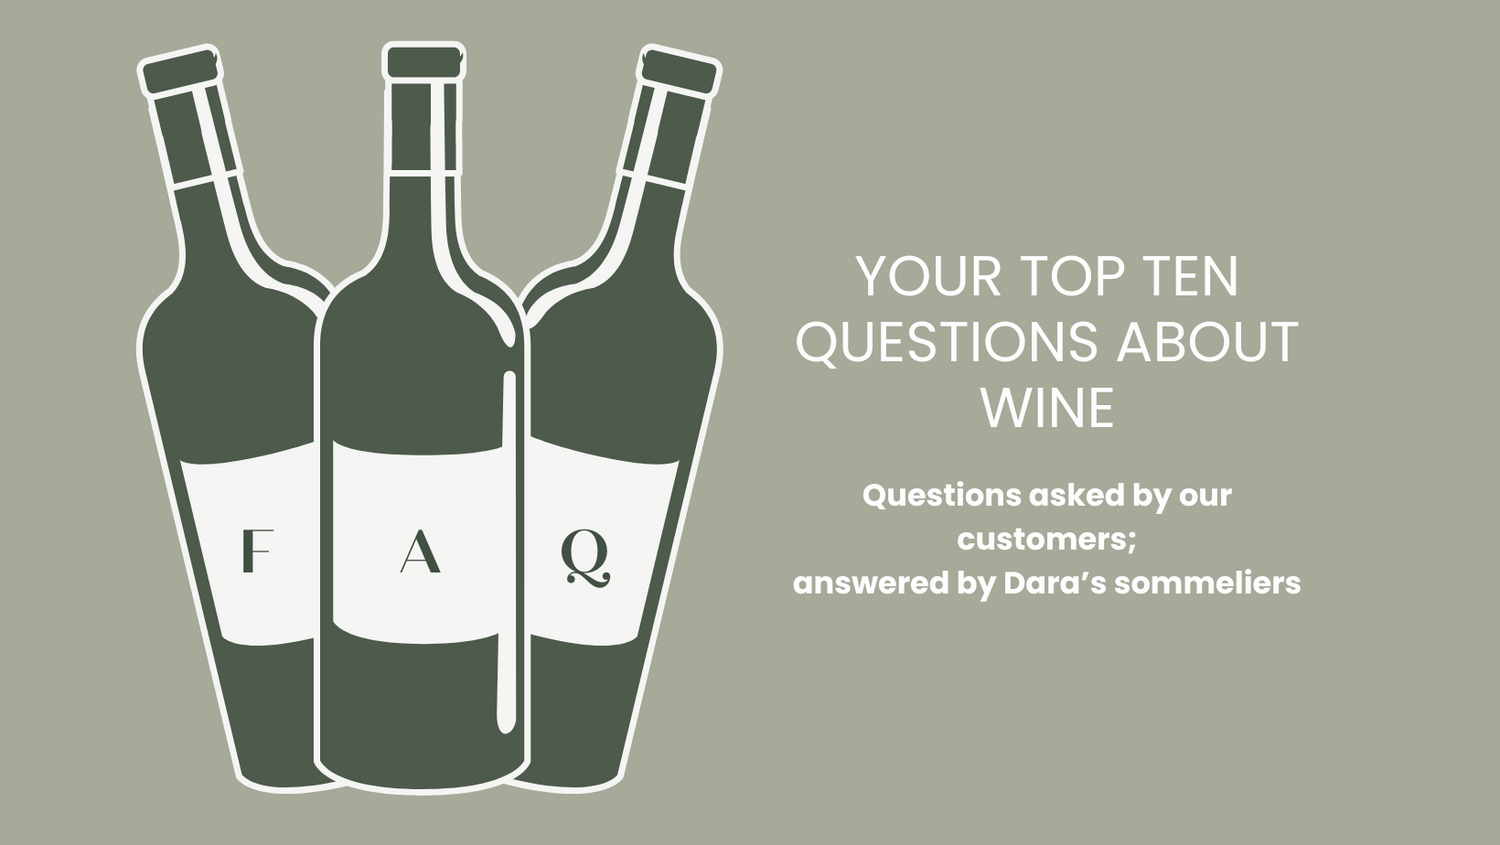 Your Top Ten Questions About Wine